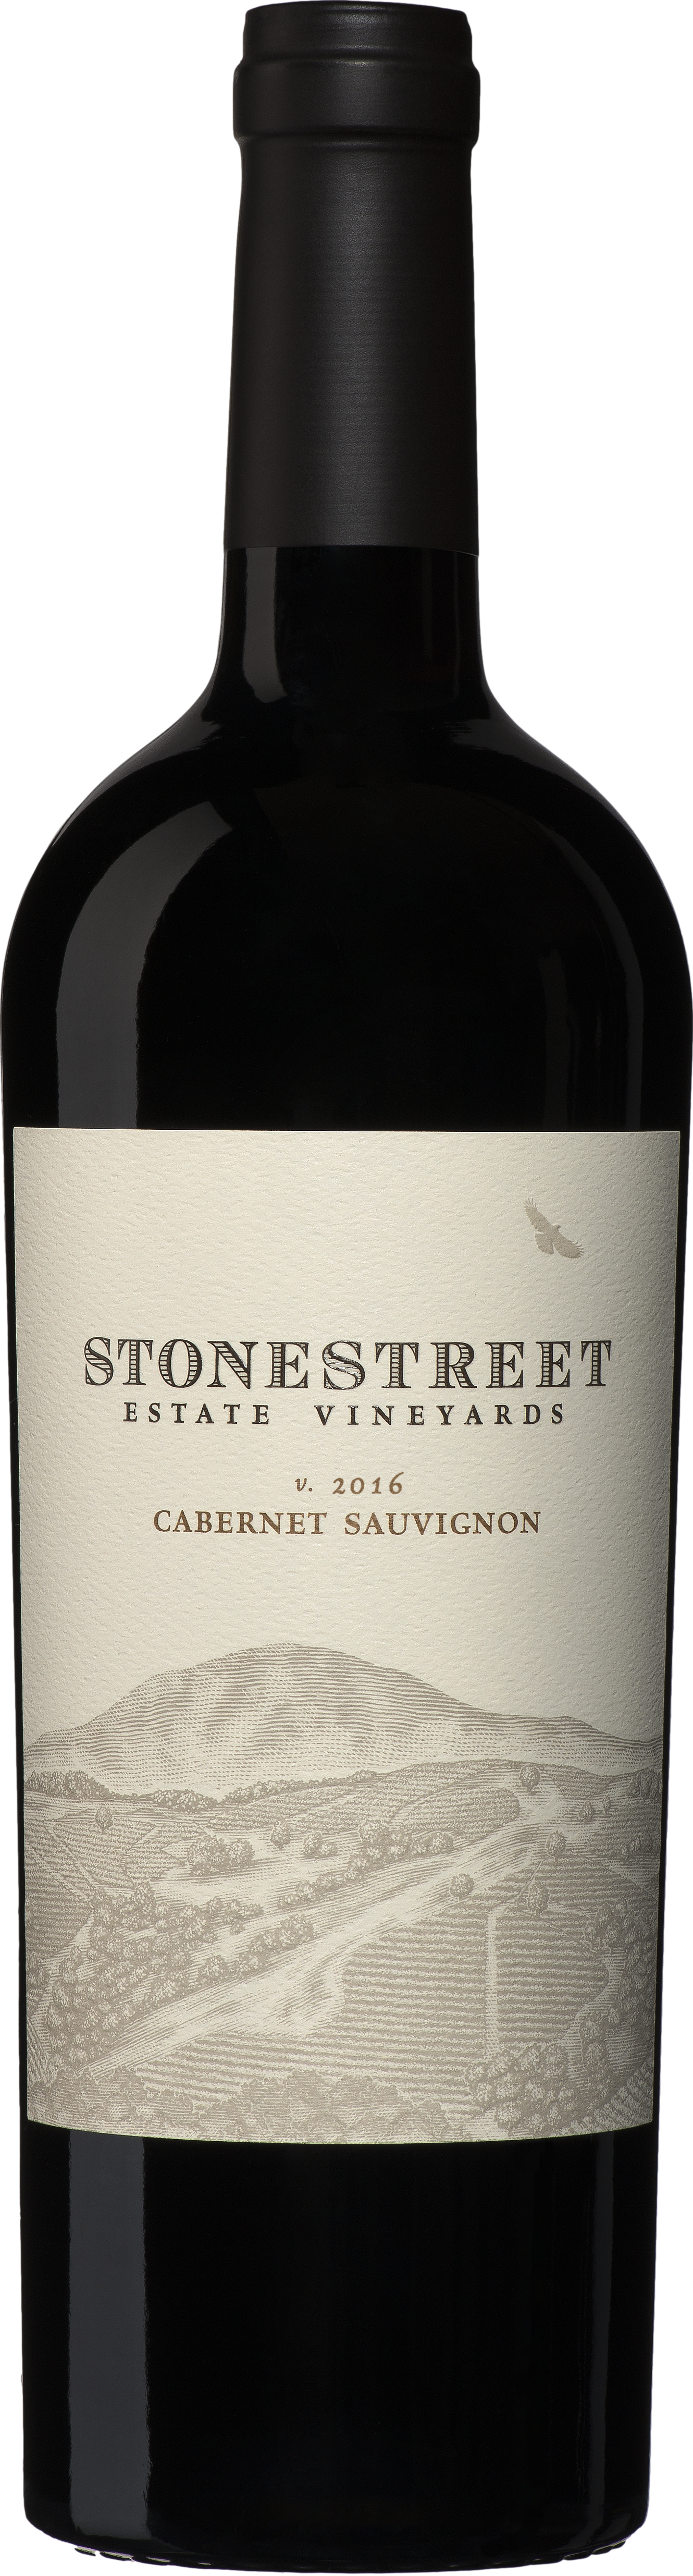 Product image of Stonestreet Estate Vineyards Cabernet Sauvignon 2016 from 8wines